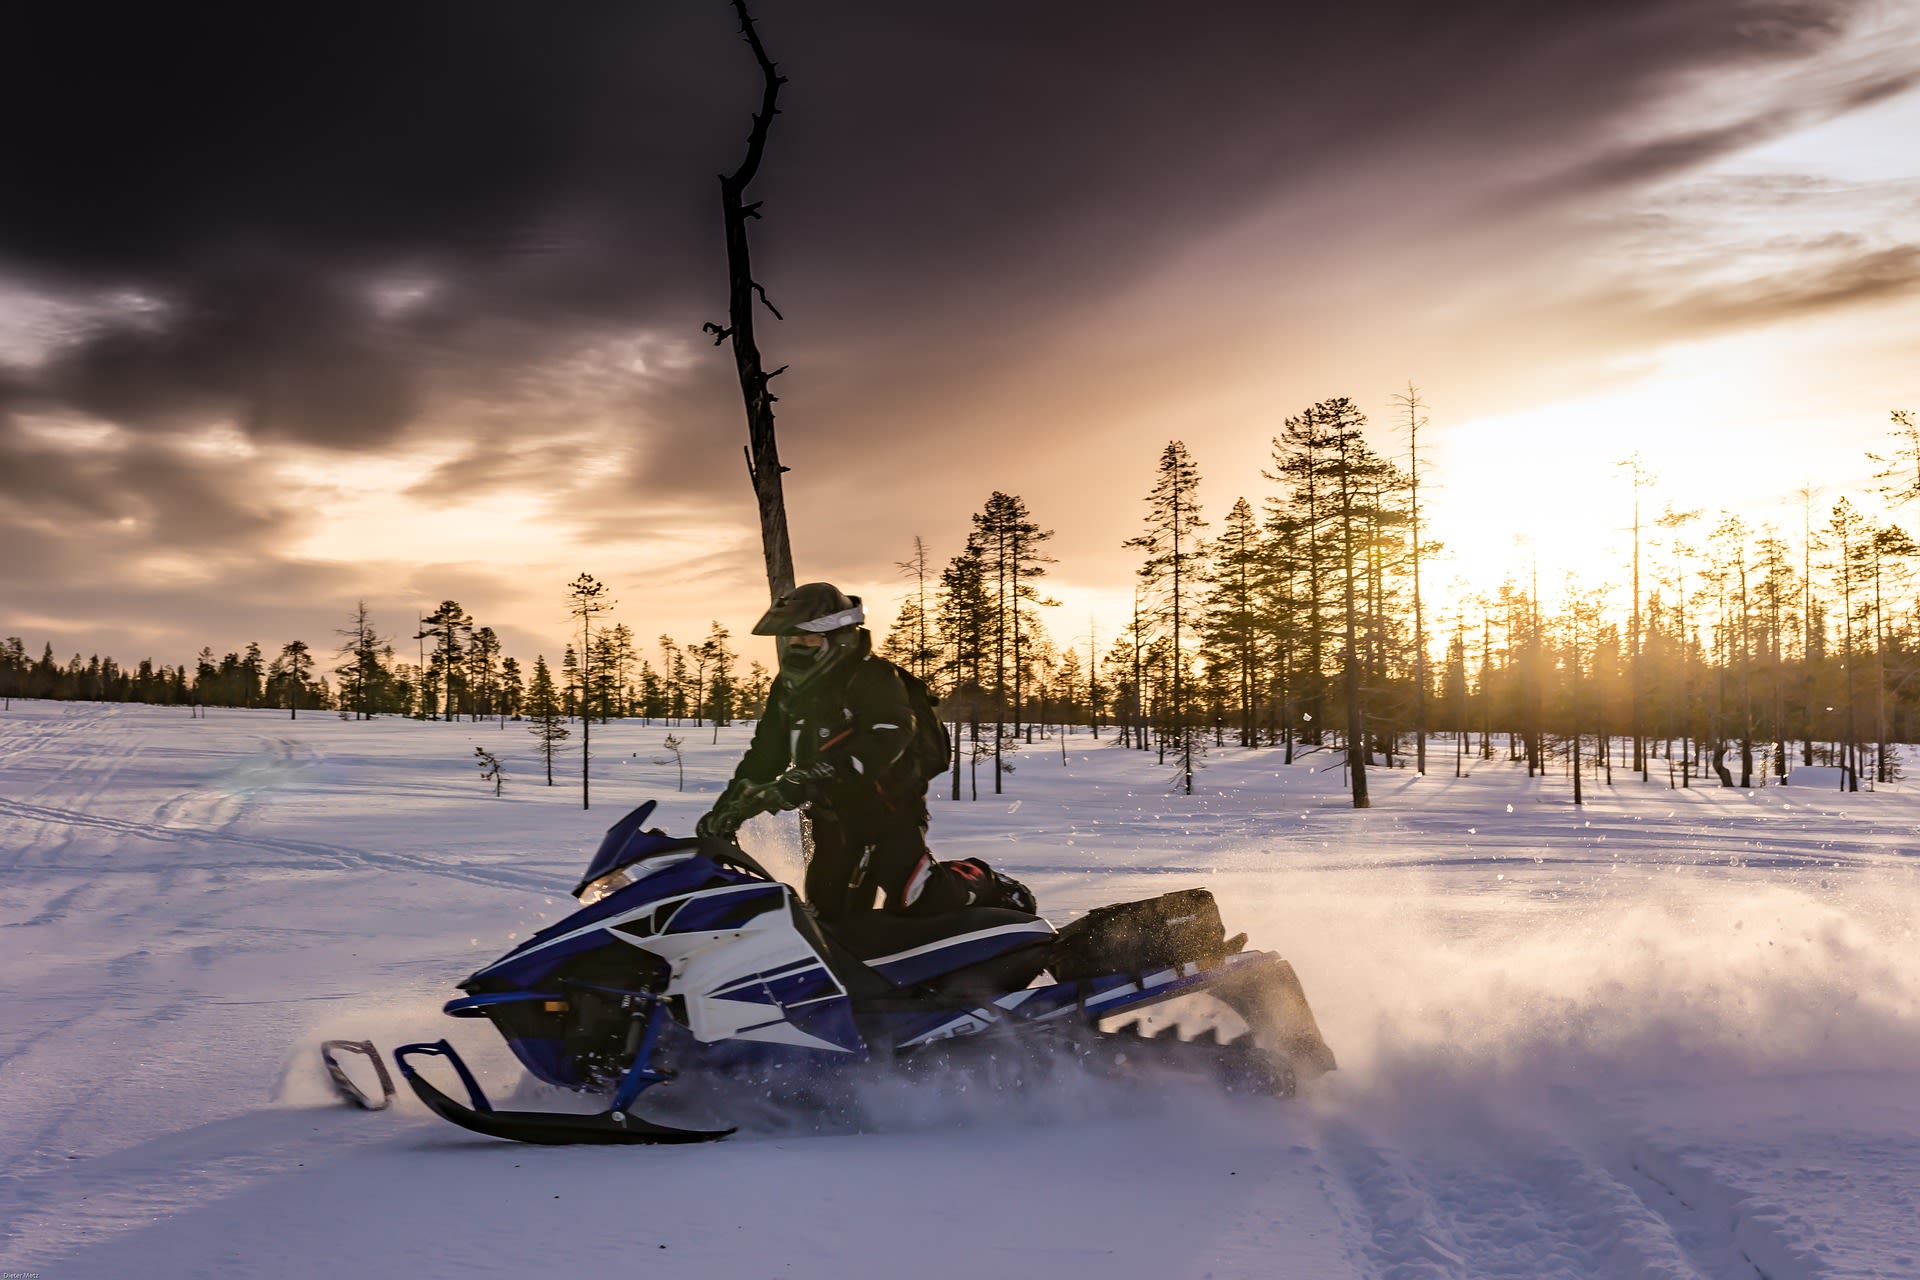 Go on a snowboarding tour in Lapland